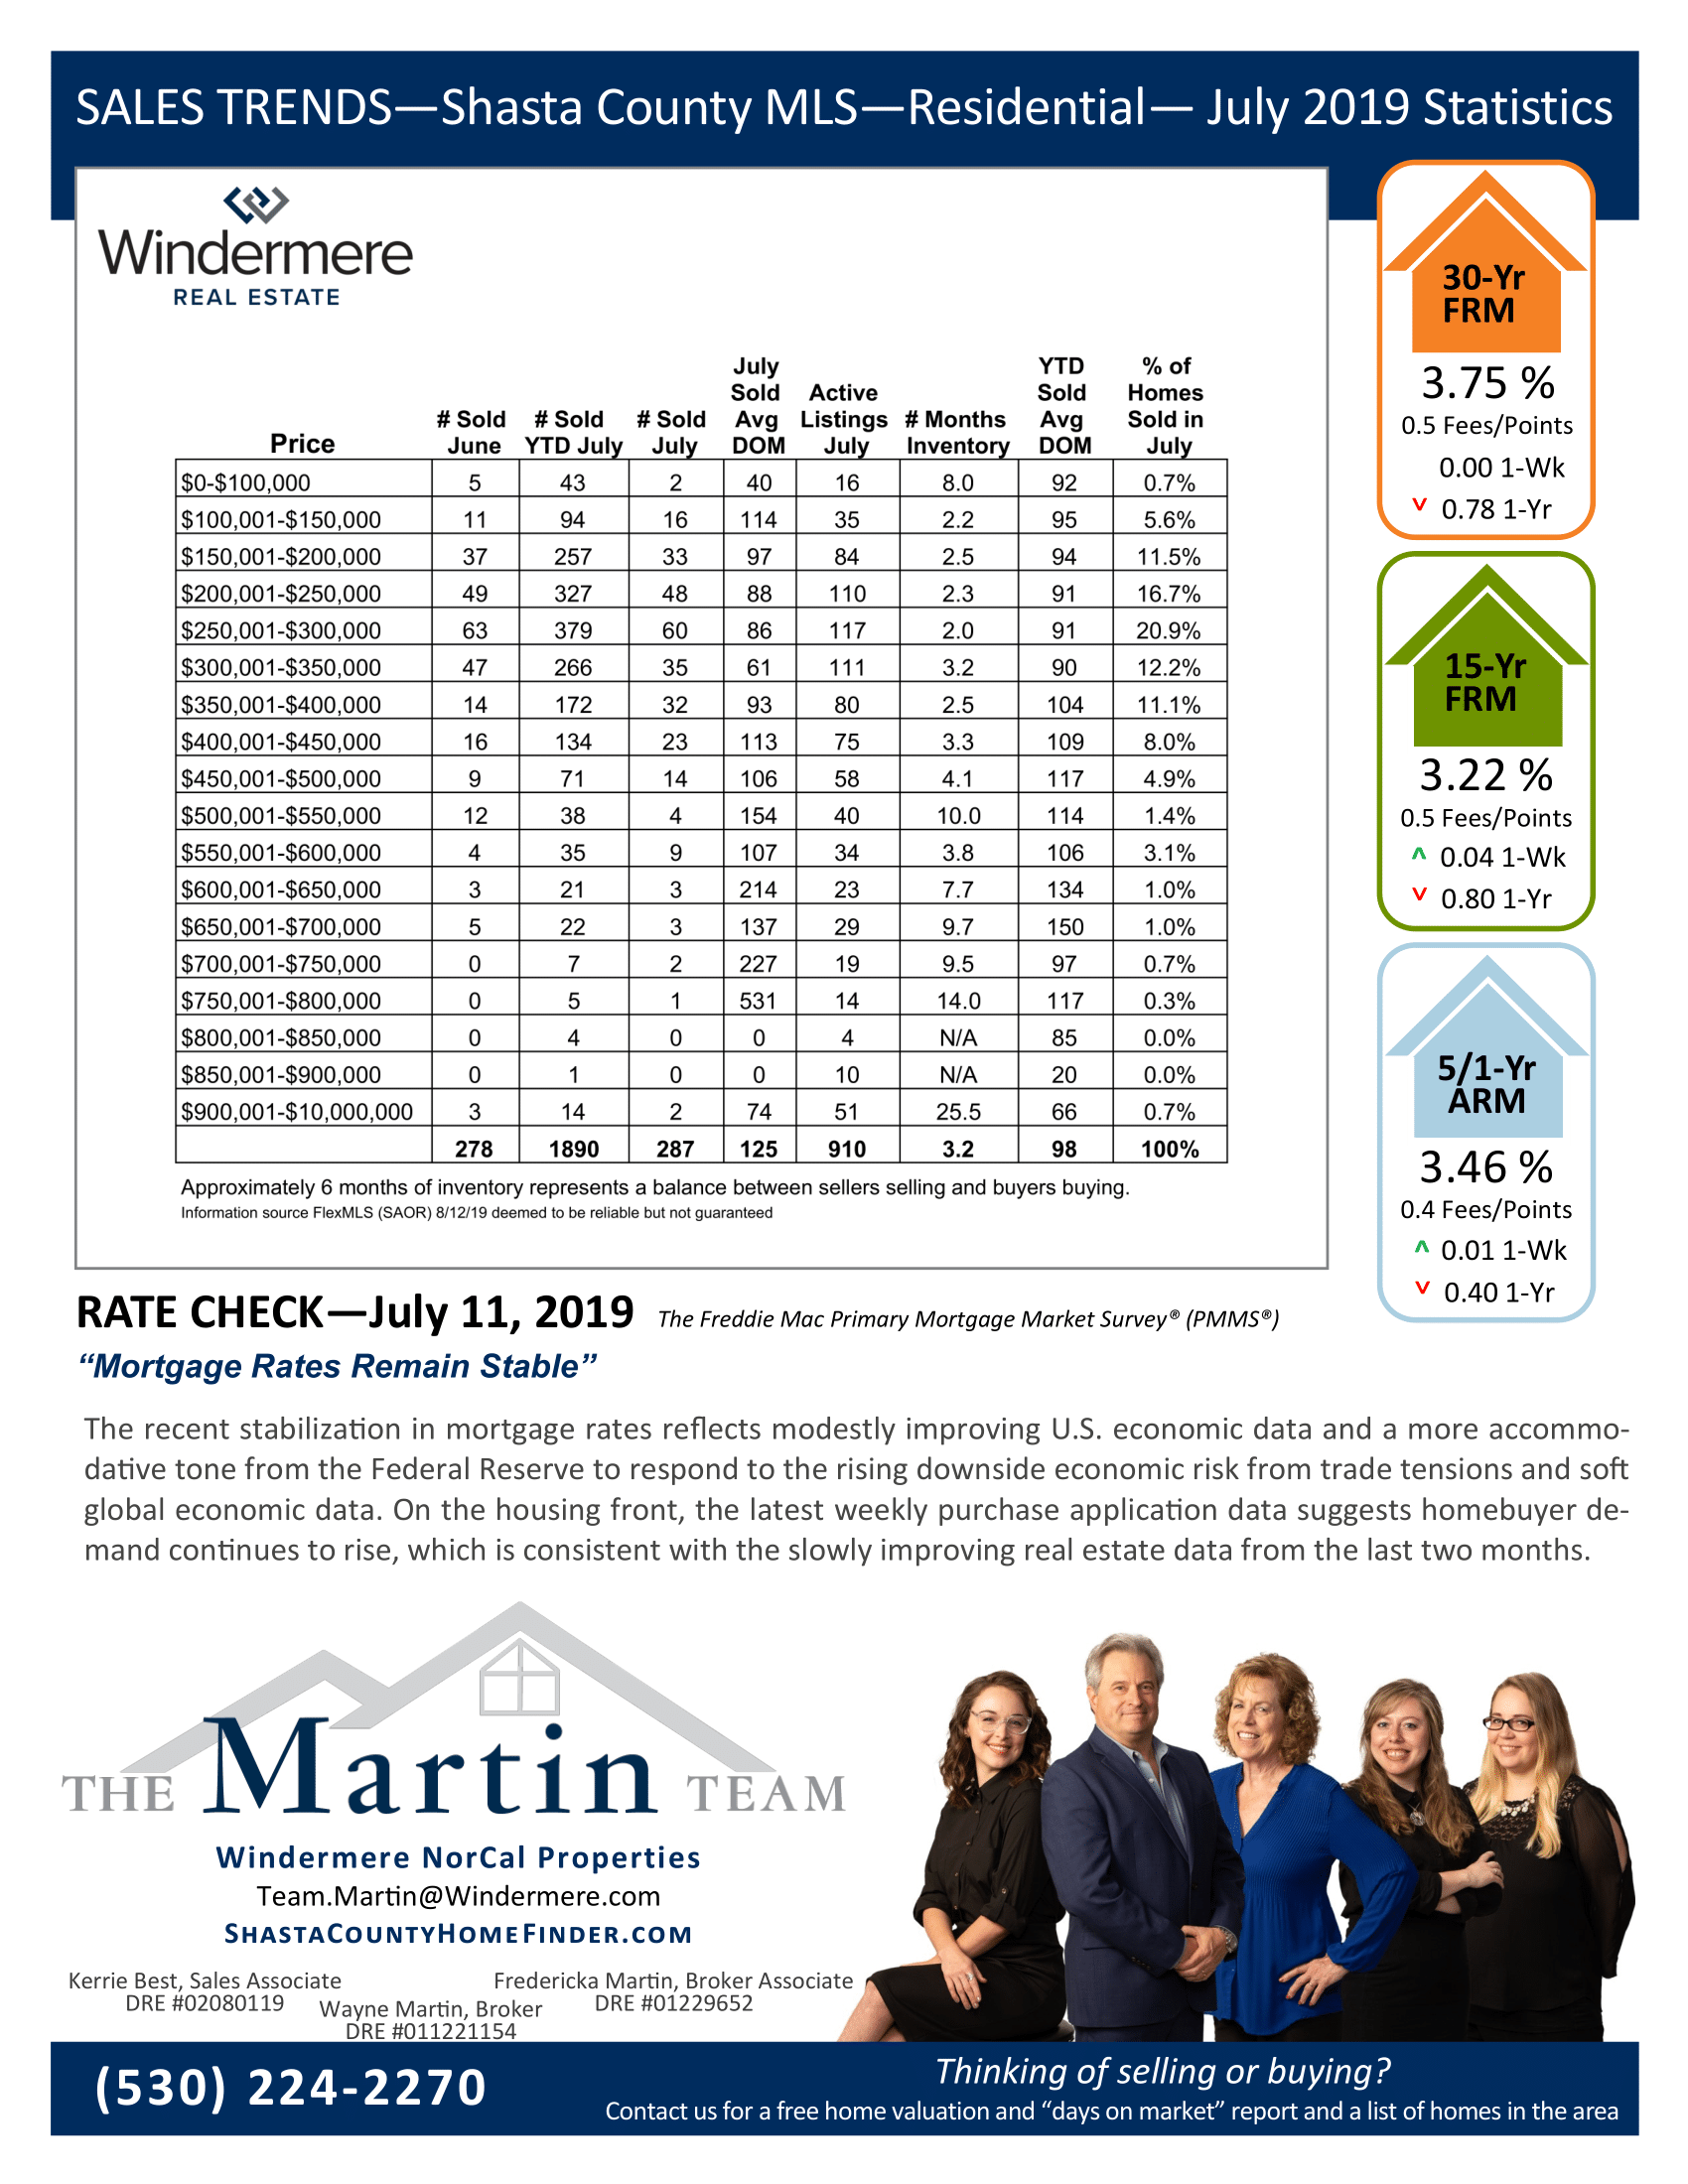 Sales Trends Reports July 2019. Mortgage rates and statistics on residential sales for July 2019.